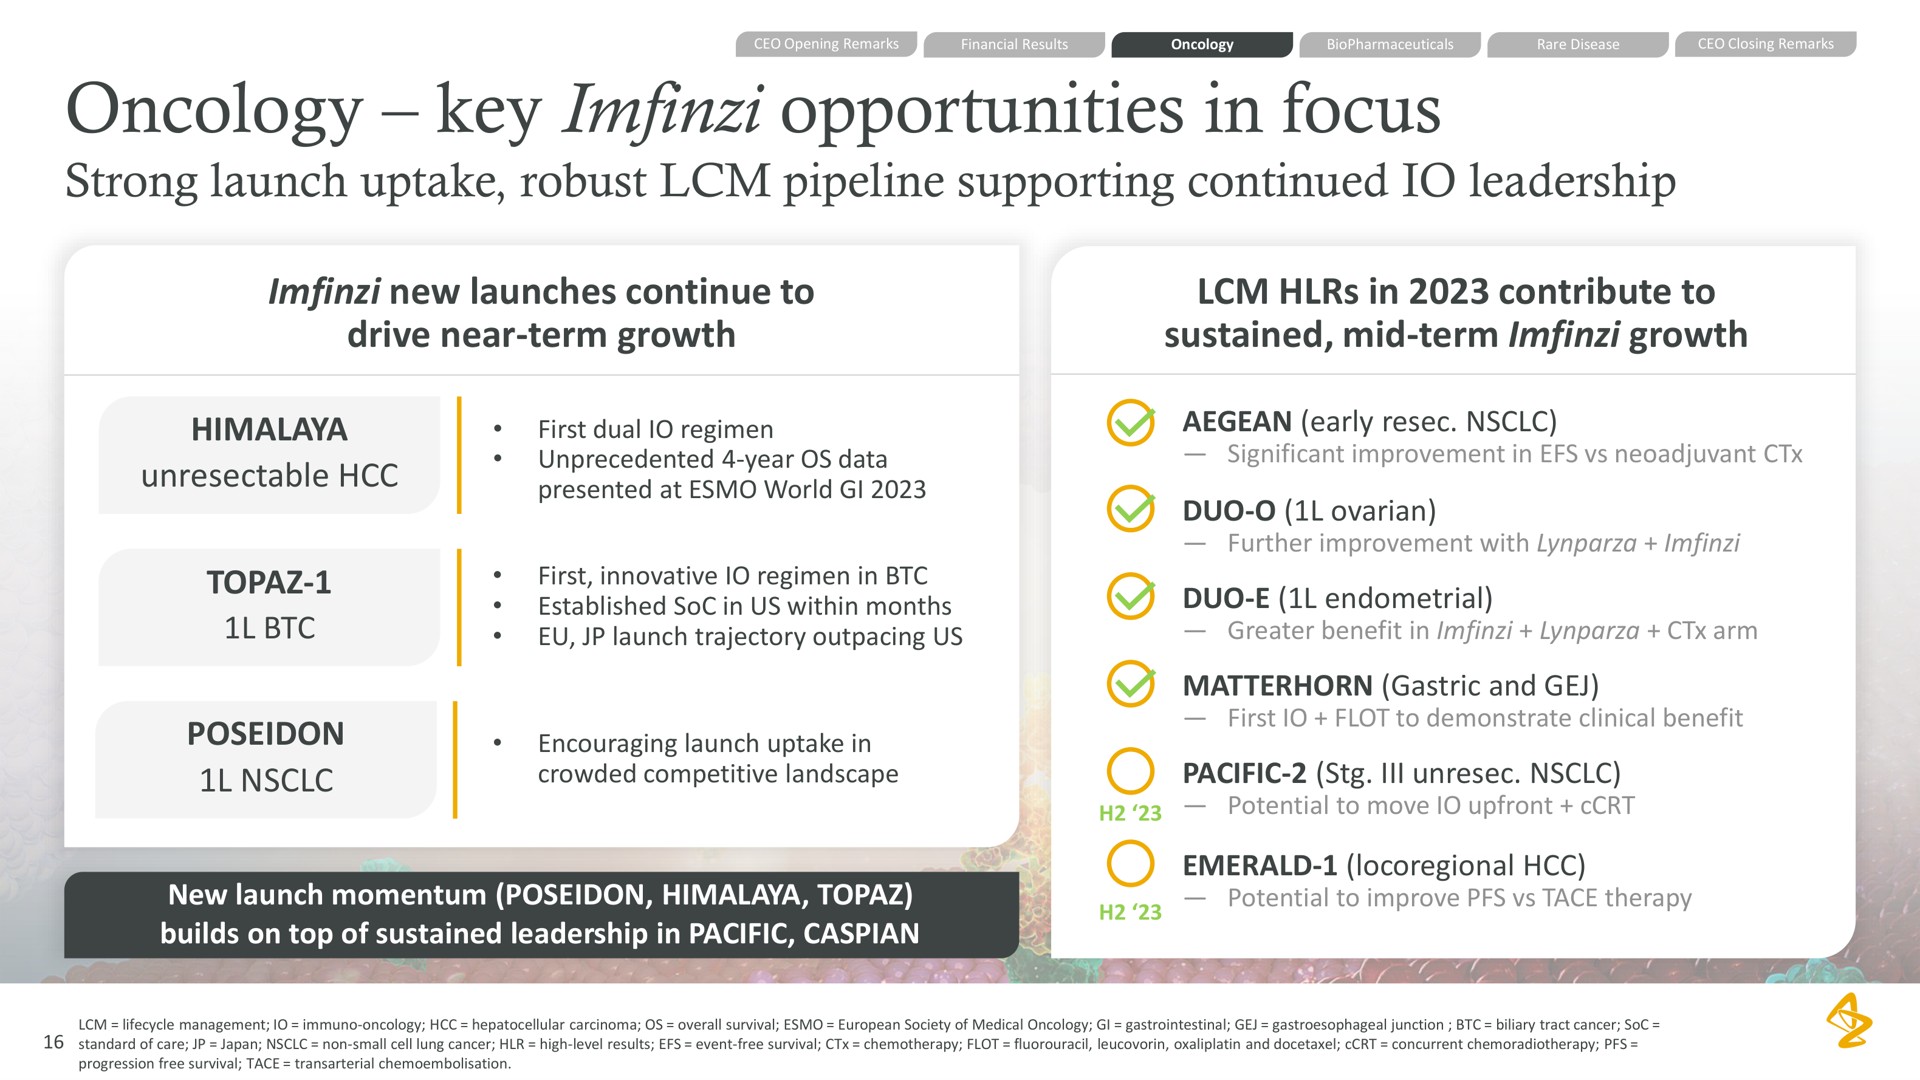 oncology key opportunities in focus strong launch uptake robust pipeline supporting continued leadership new launches continue to in contribute to drive near term growth sustained mid term growth revenues driven by continued her low bolus topaz revenues driven by continued her low bolus | AstraZeneca